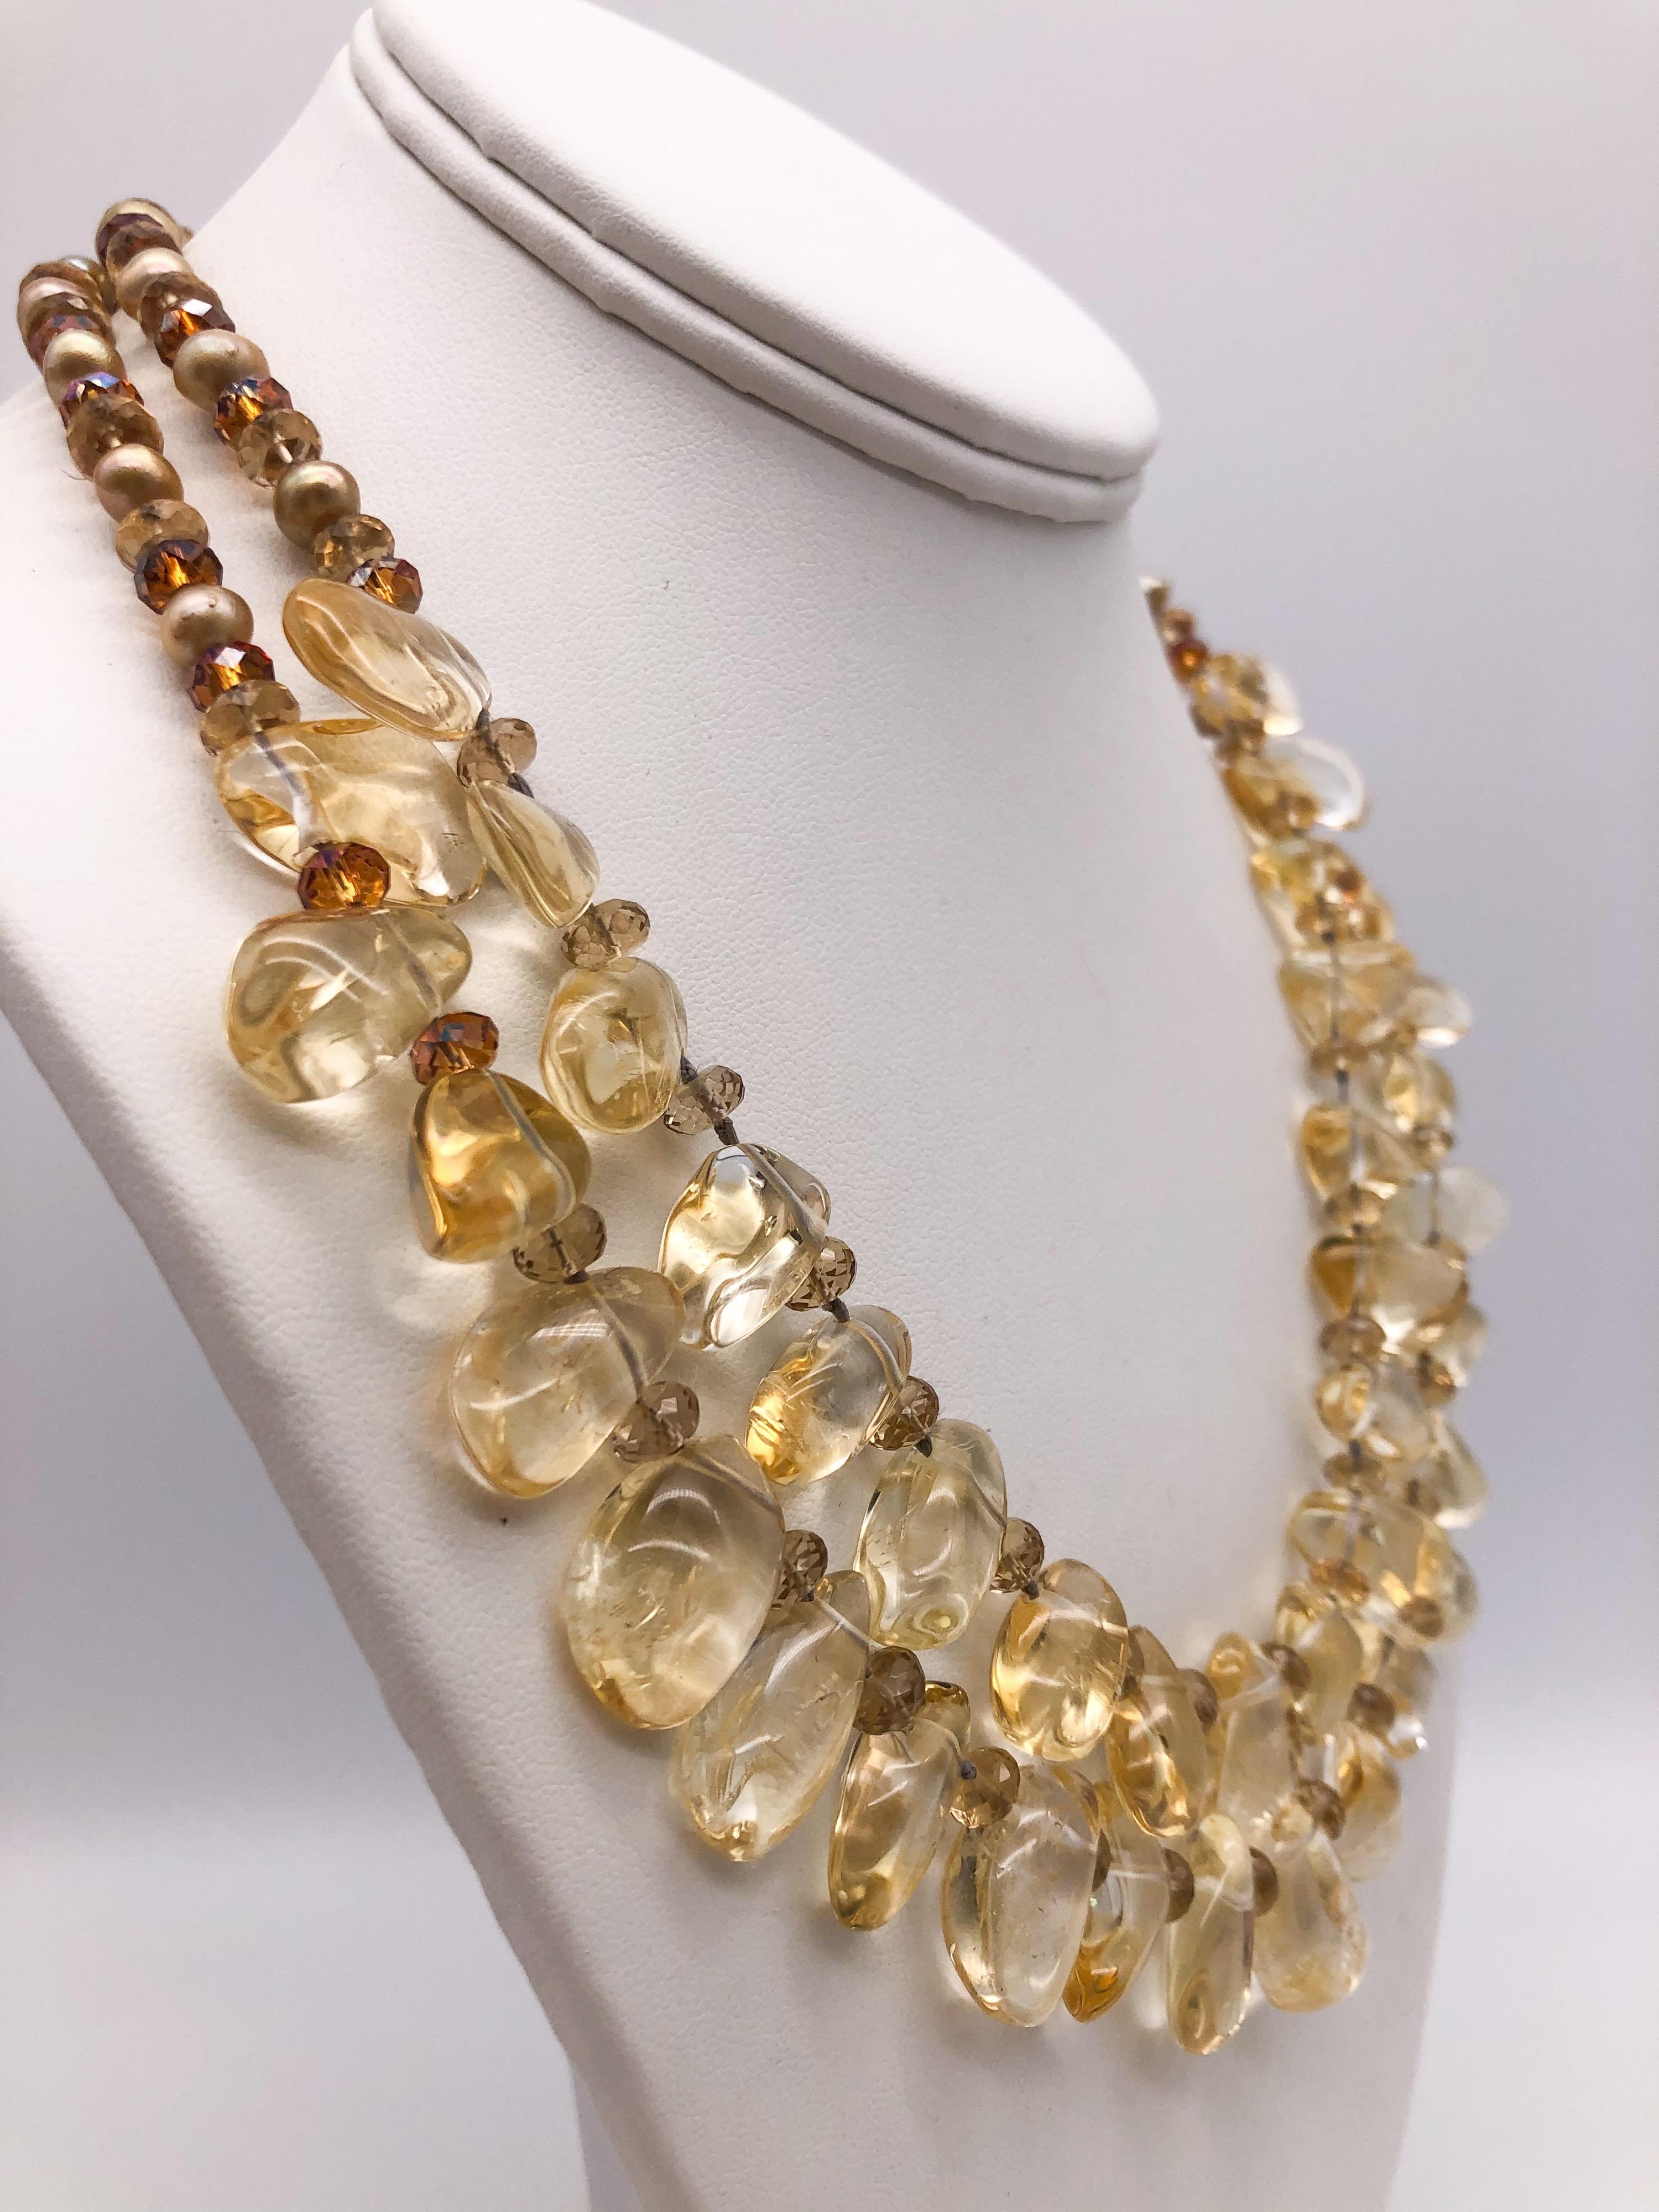 One-of-a-Kind

A double strand of transparent, polished, citrine drops.  From collar bone to collar bone the citrine stones are met by a double strand of faceted topaz citrine beads and gold pearls. The slim strands allow for a comfortable yet